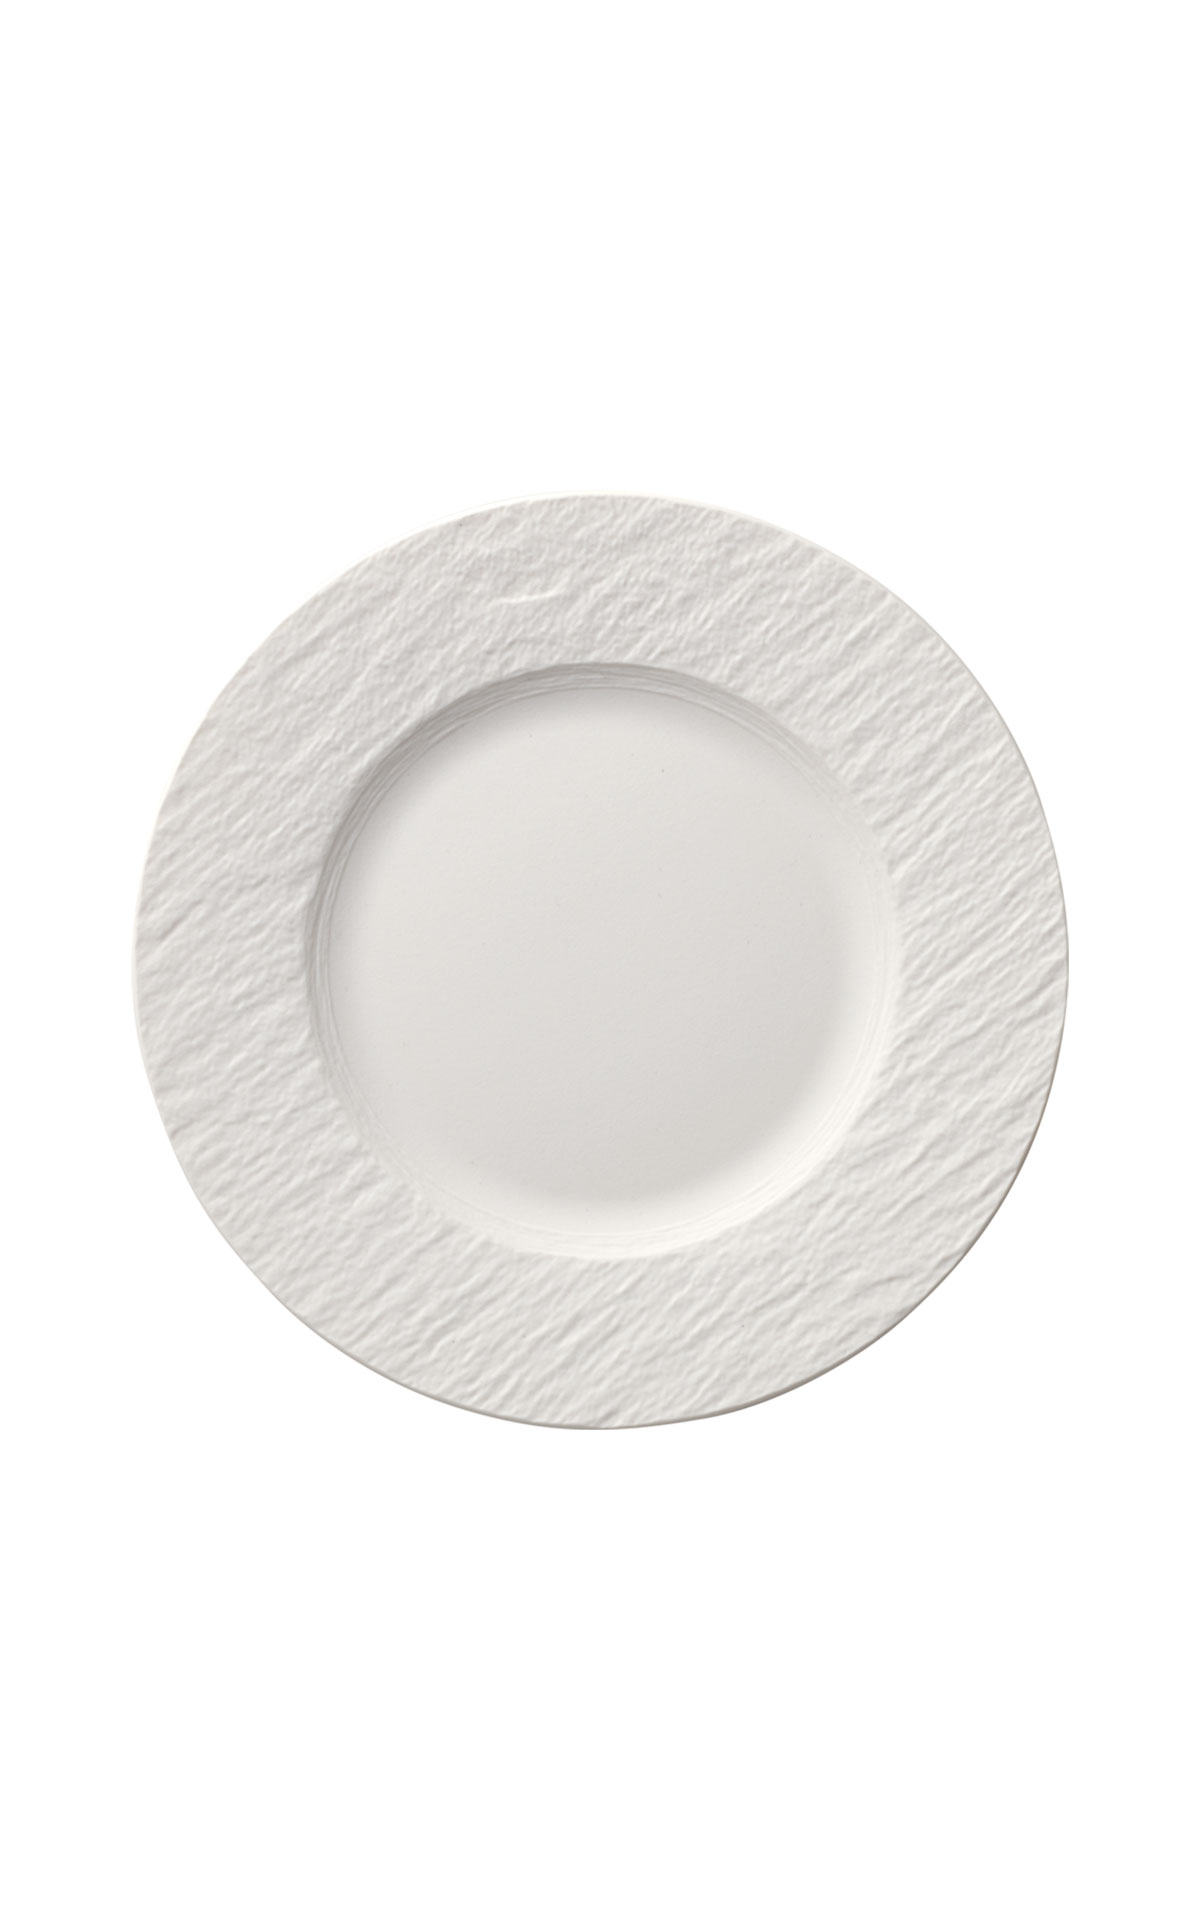 Villeroy and Boch Manufacture blanc flat plate 27cm from Bicester Village